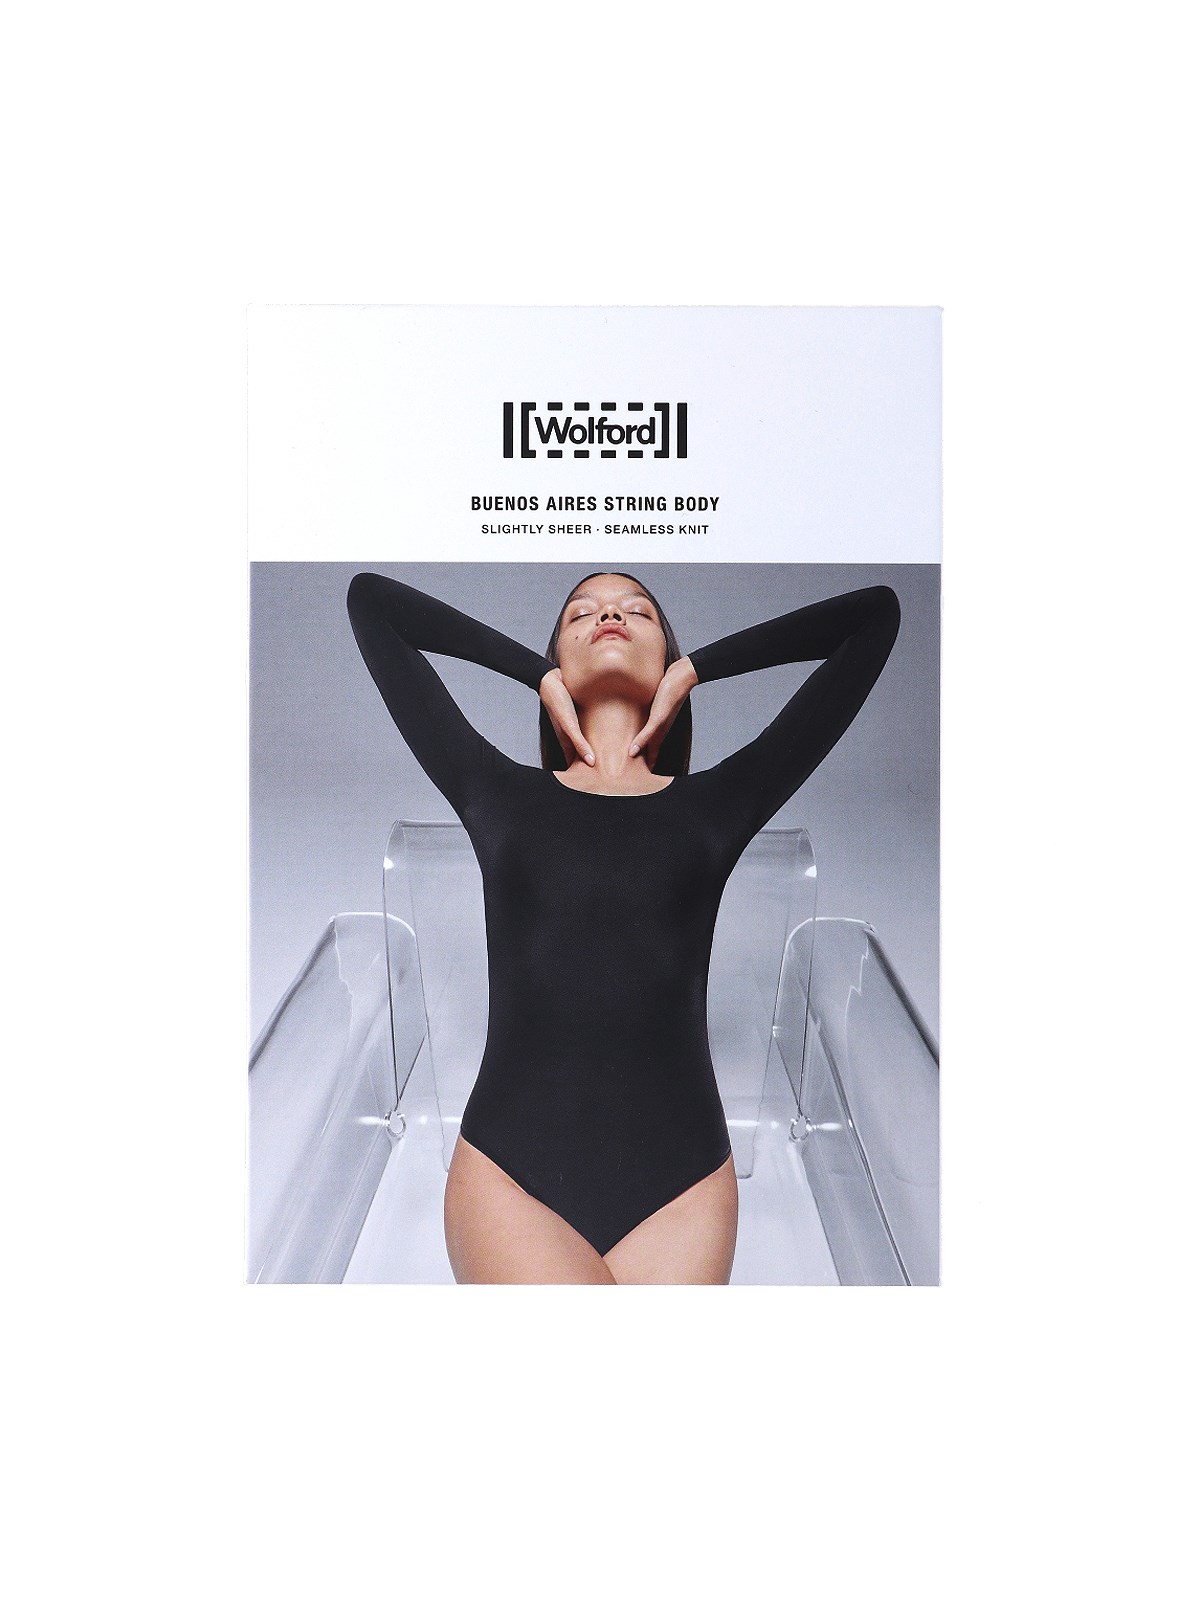 Wolford 'buenos aires' body available on SUGAR - 141636